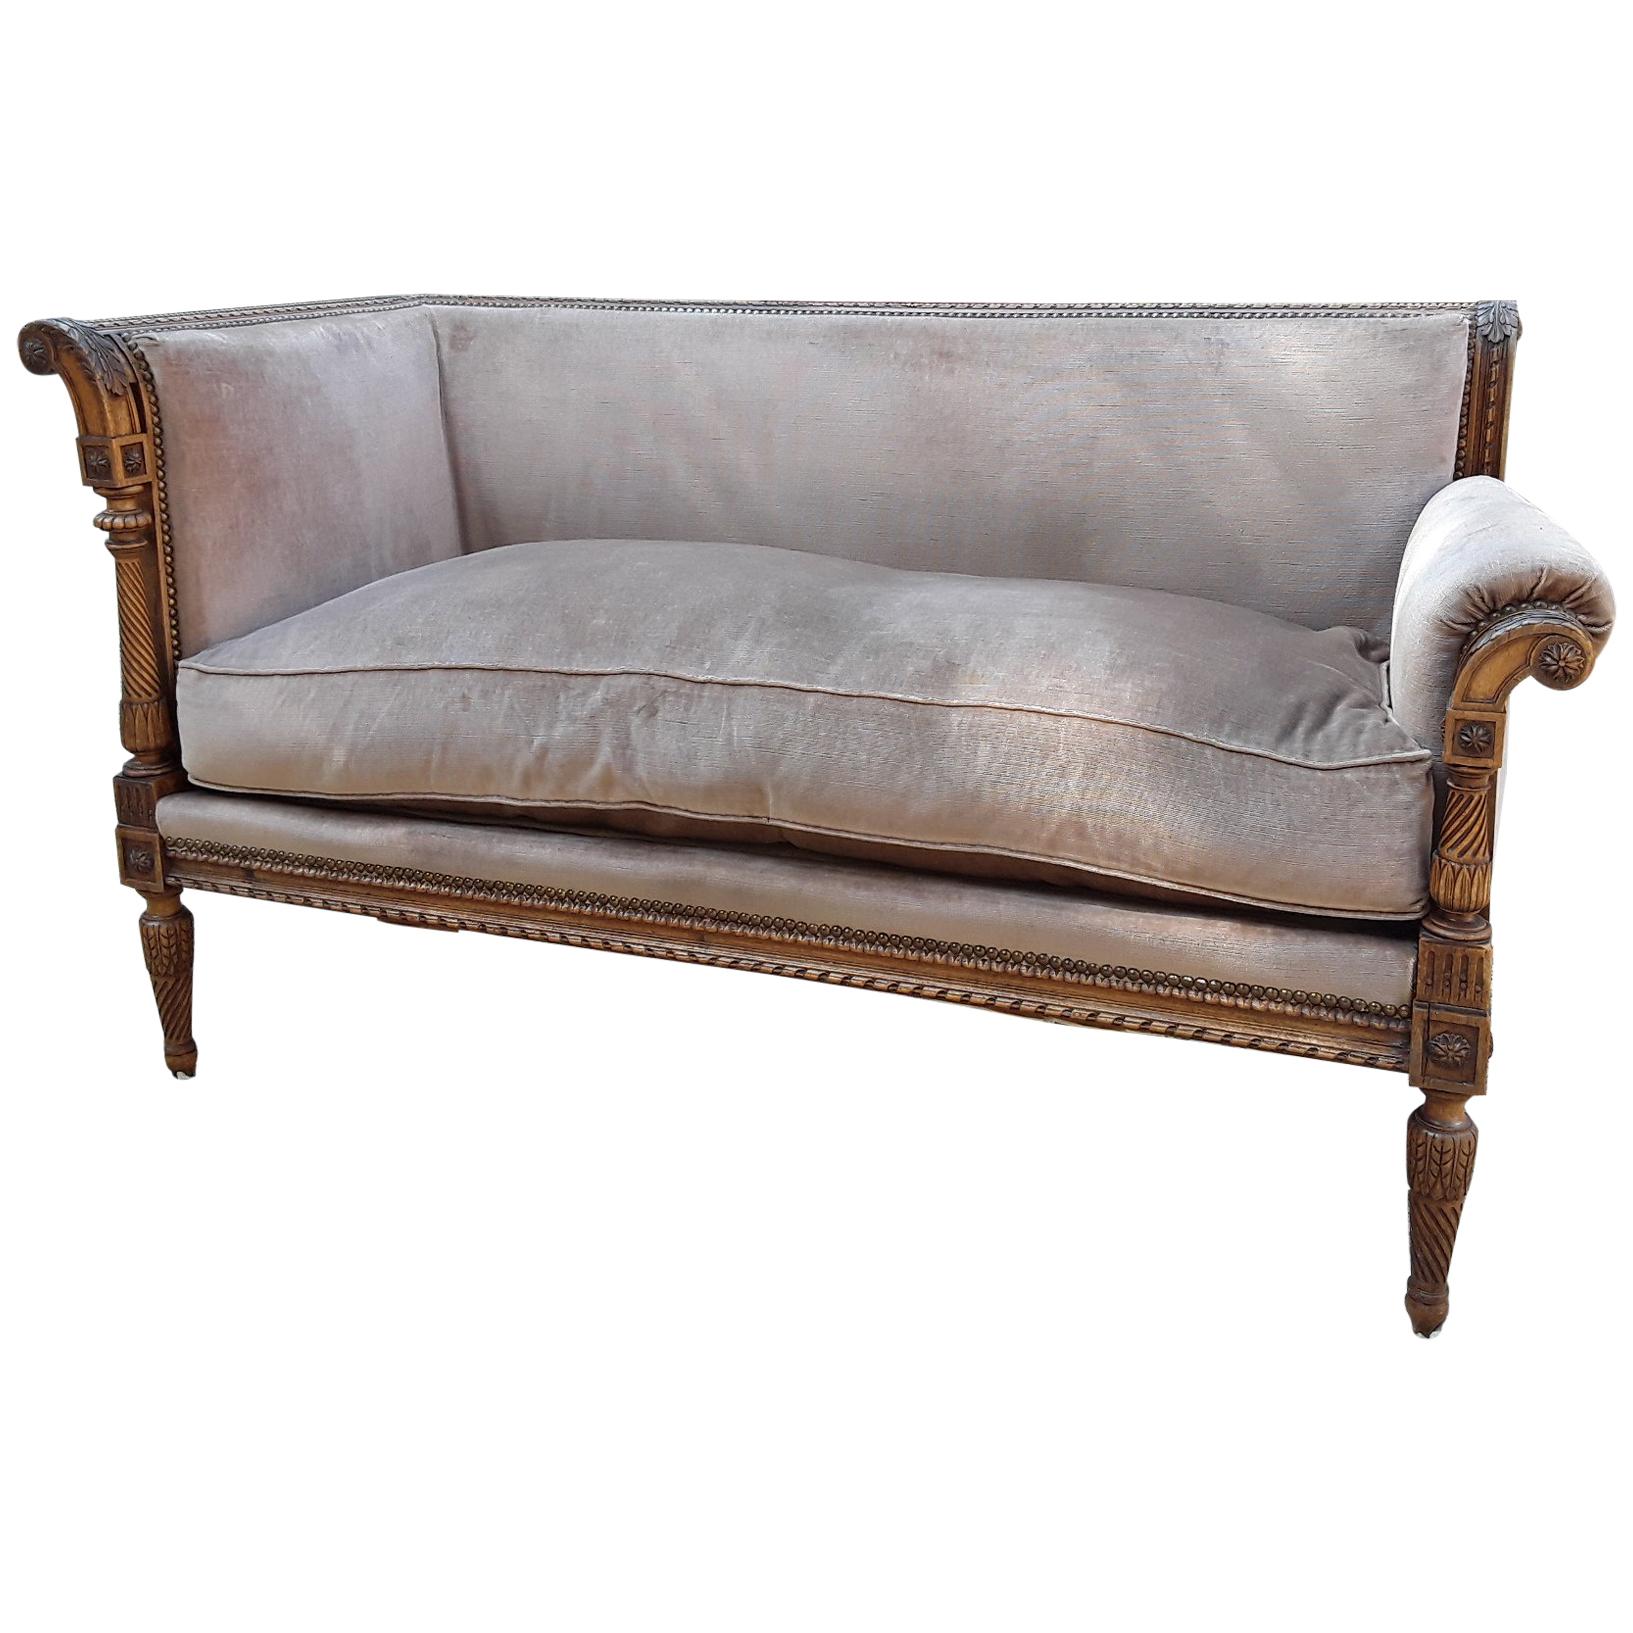 19th Century French Carved Wood Sofa with Original Fabric For Sale